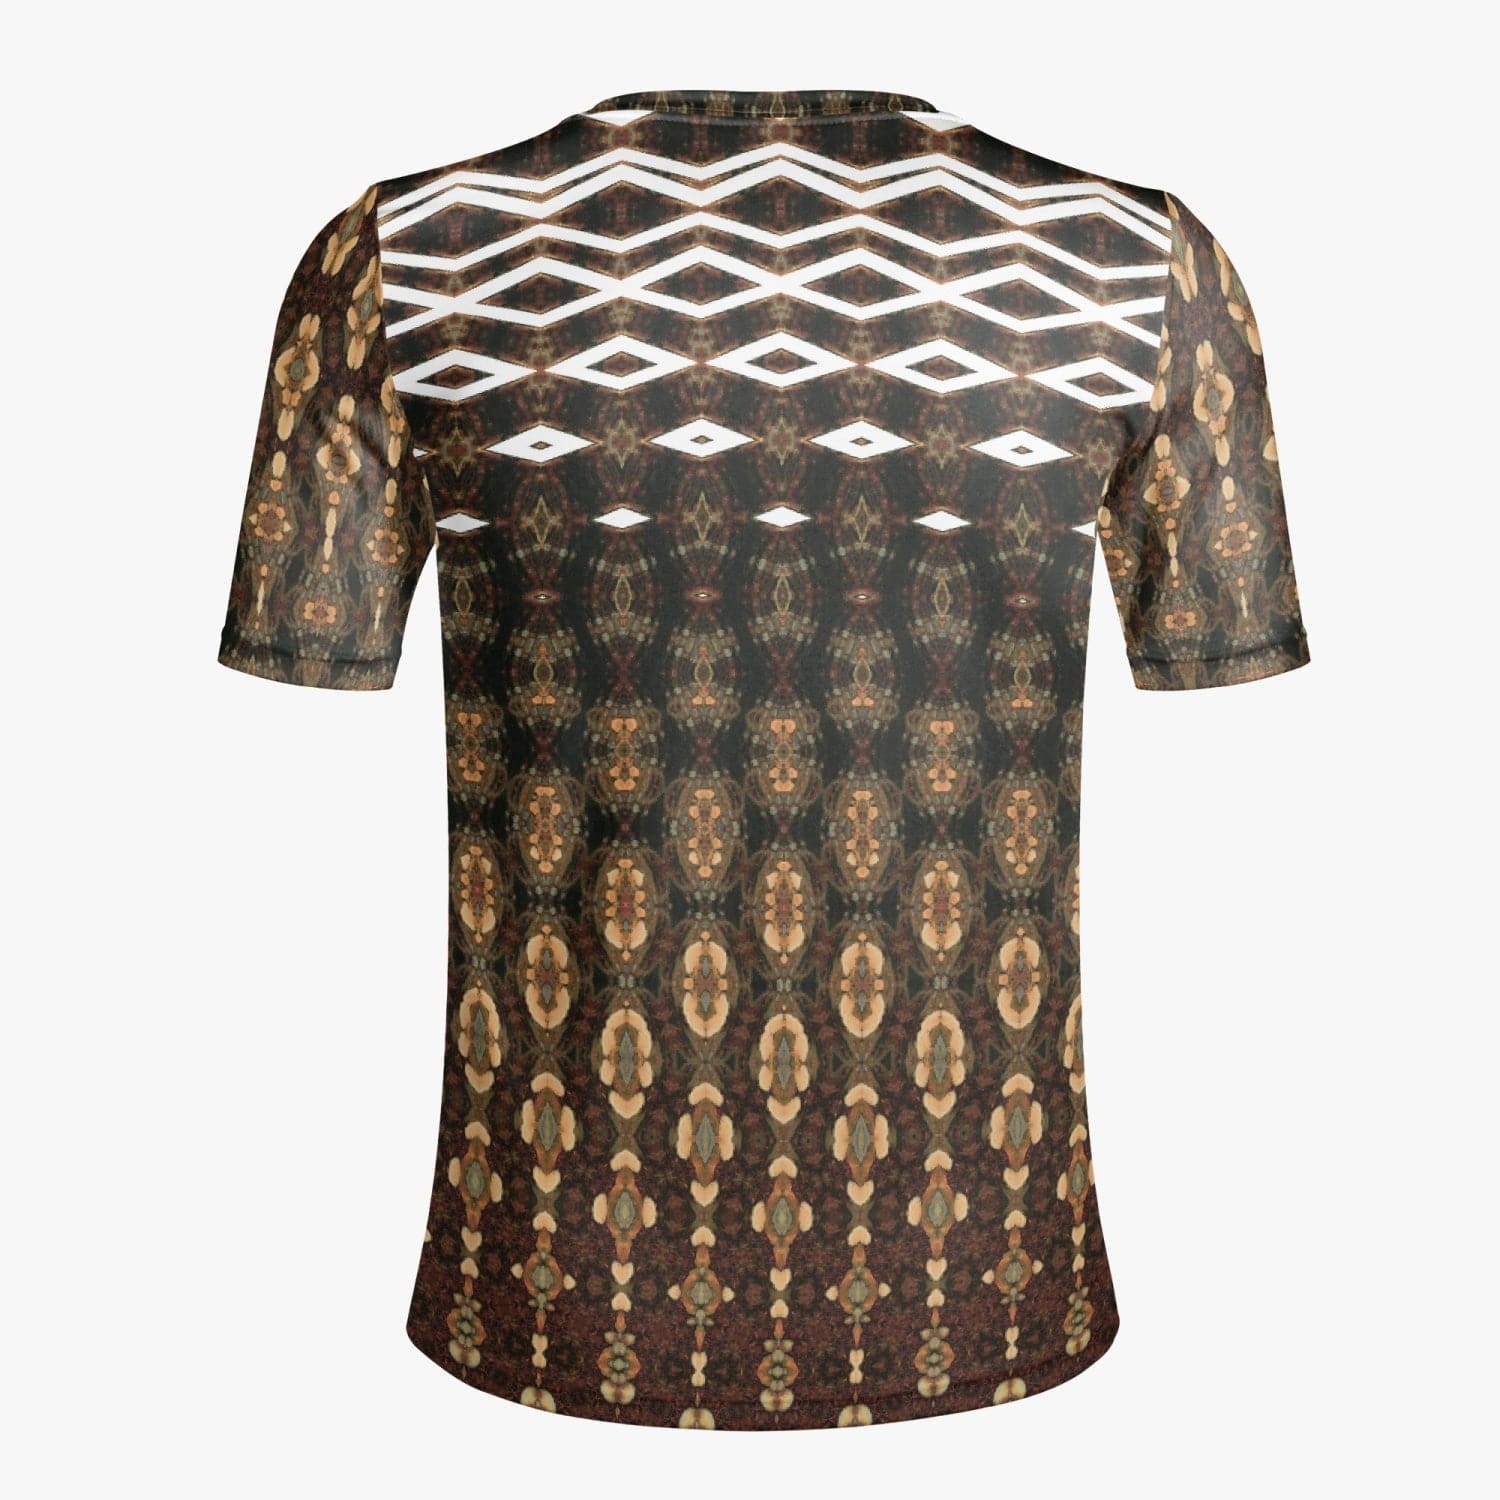 Brown with White Patterned Handmade Tribal T-shirt for Men